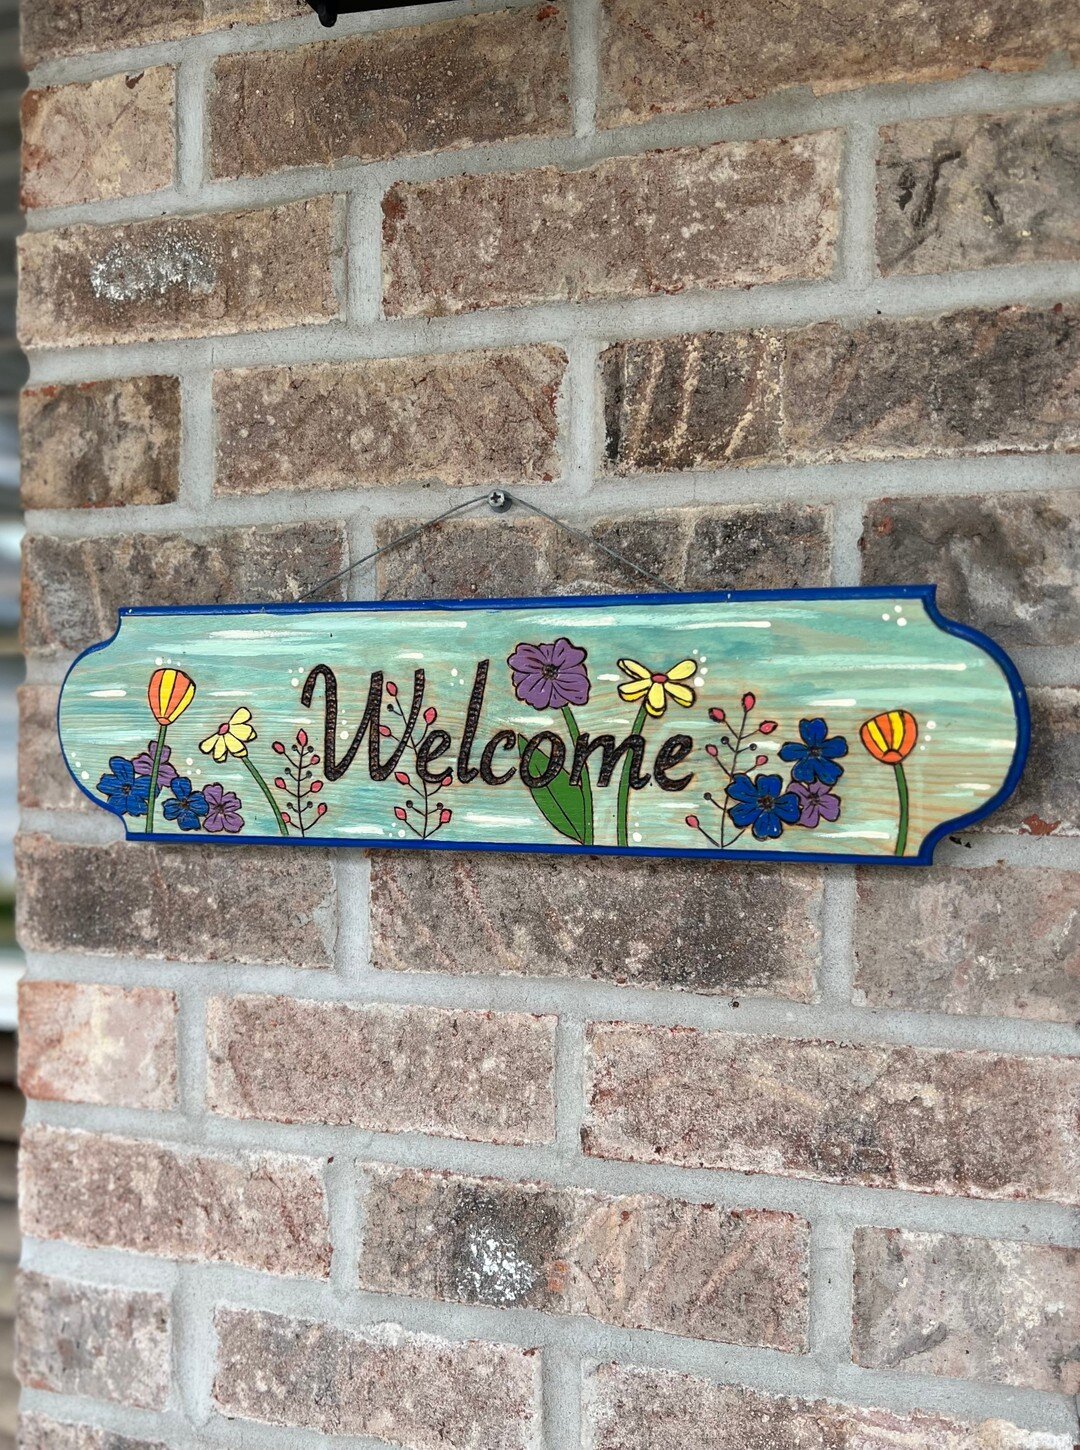 In case you want to see how far I've come in 4 years: this was one of my very first signs.⁣
I made it for my mom, upon request. She gladly accepted it and still hangs it up - though I think I should make her a new one that highlights my growth as an 